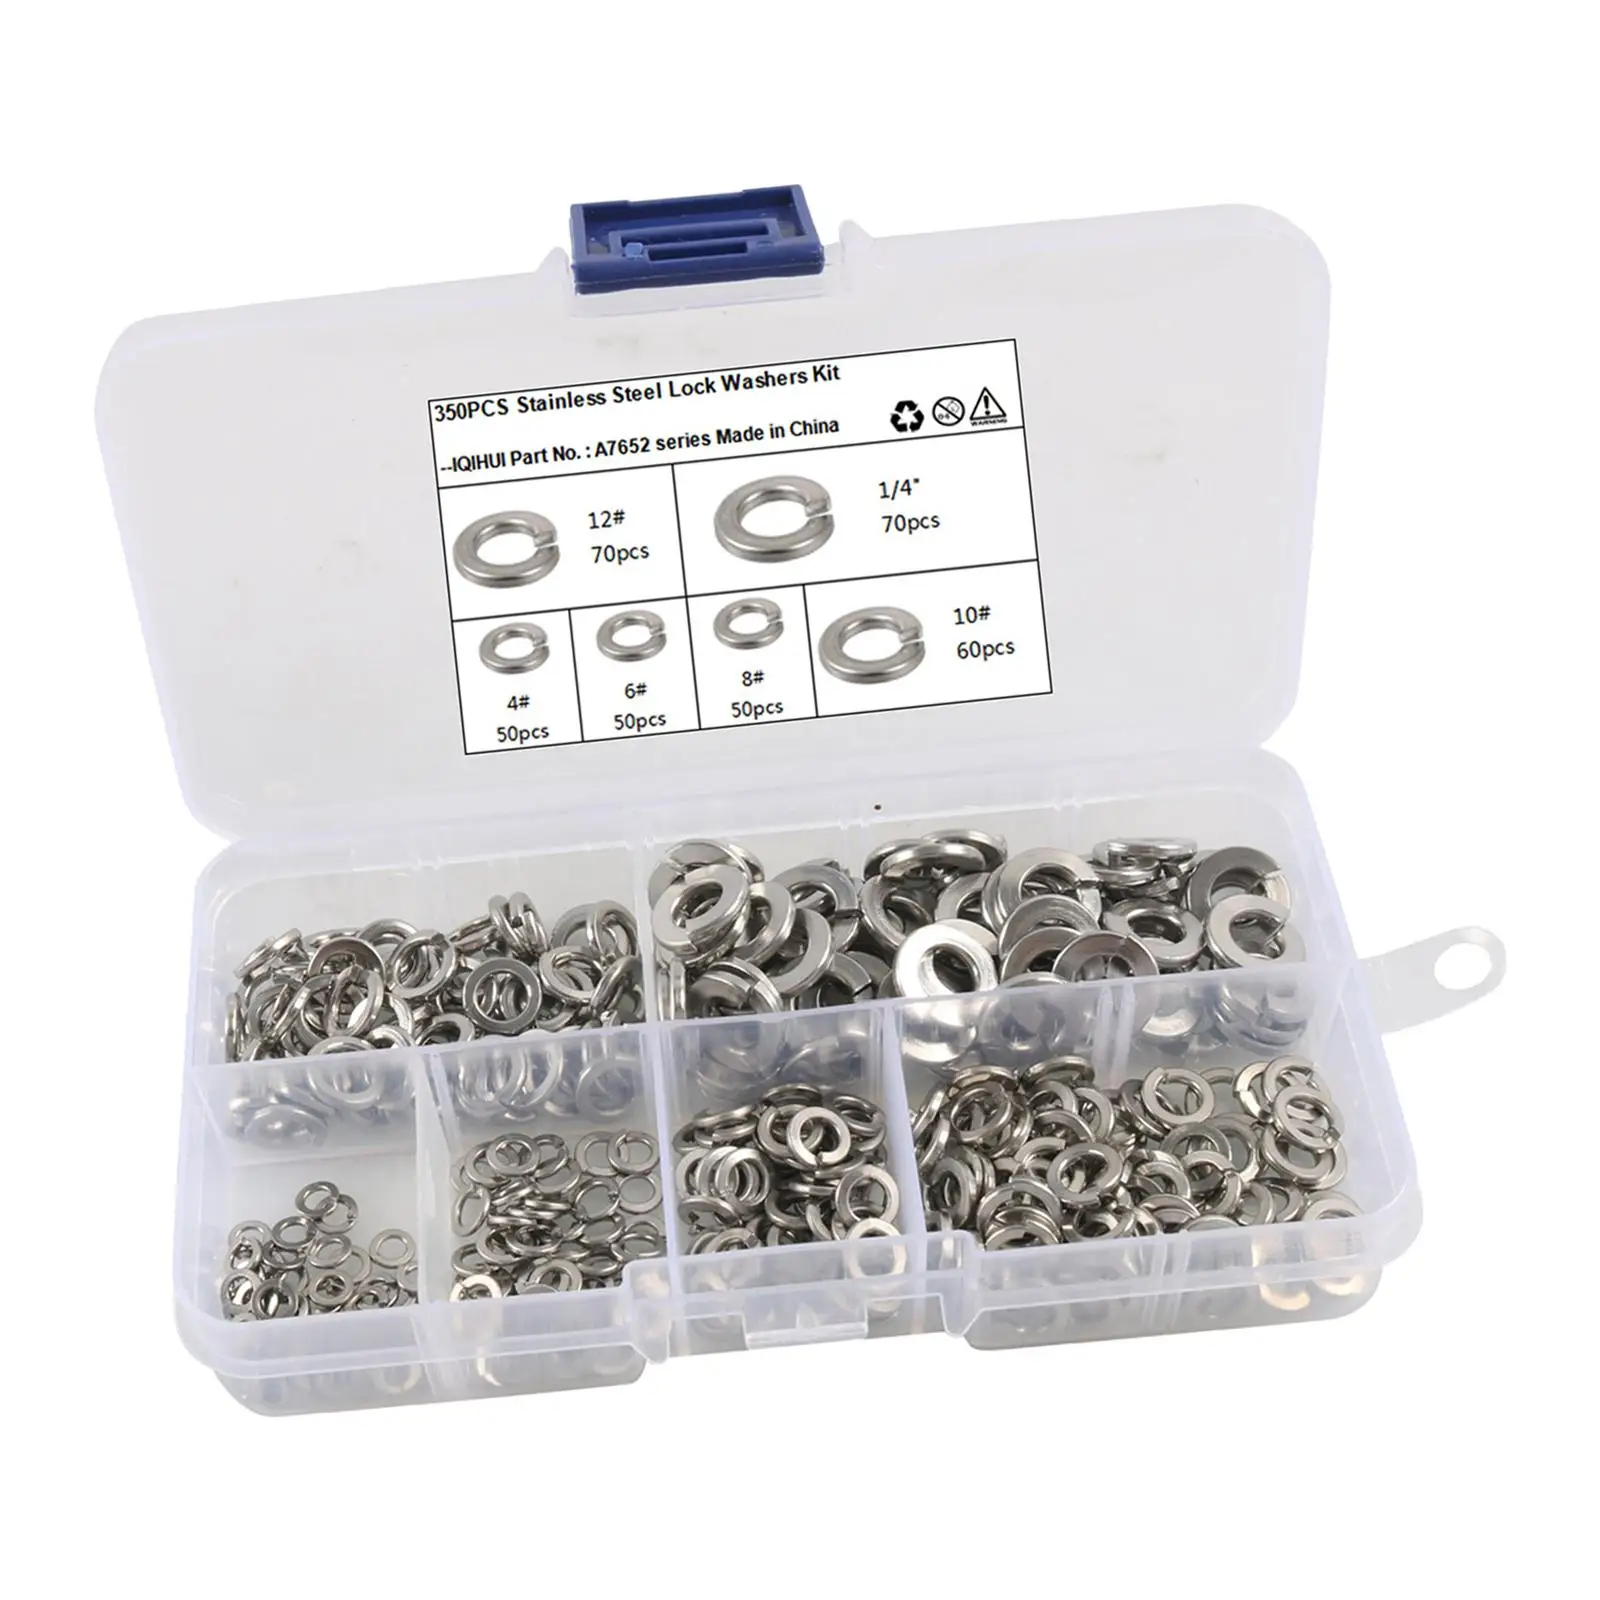 lock Washers assortment Durable with Storage Case for Outdoor Construction Car